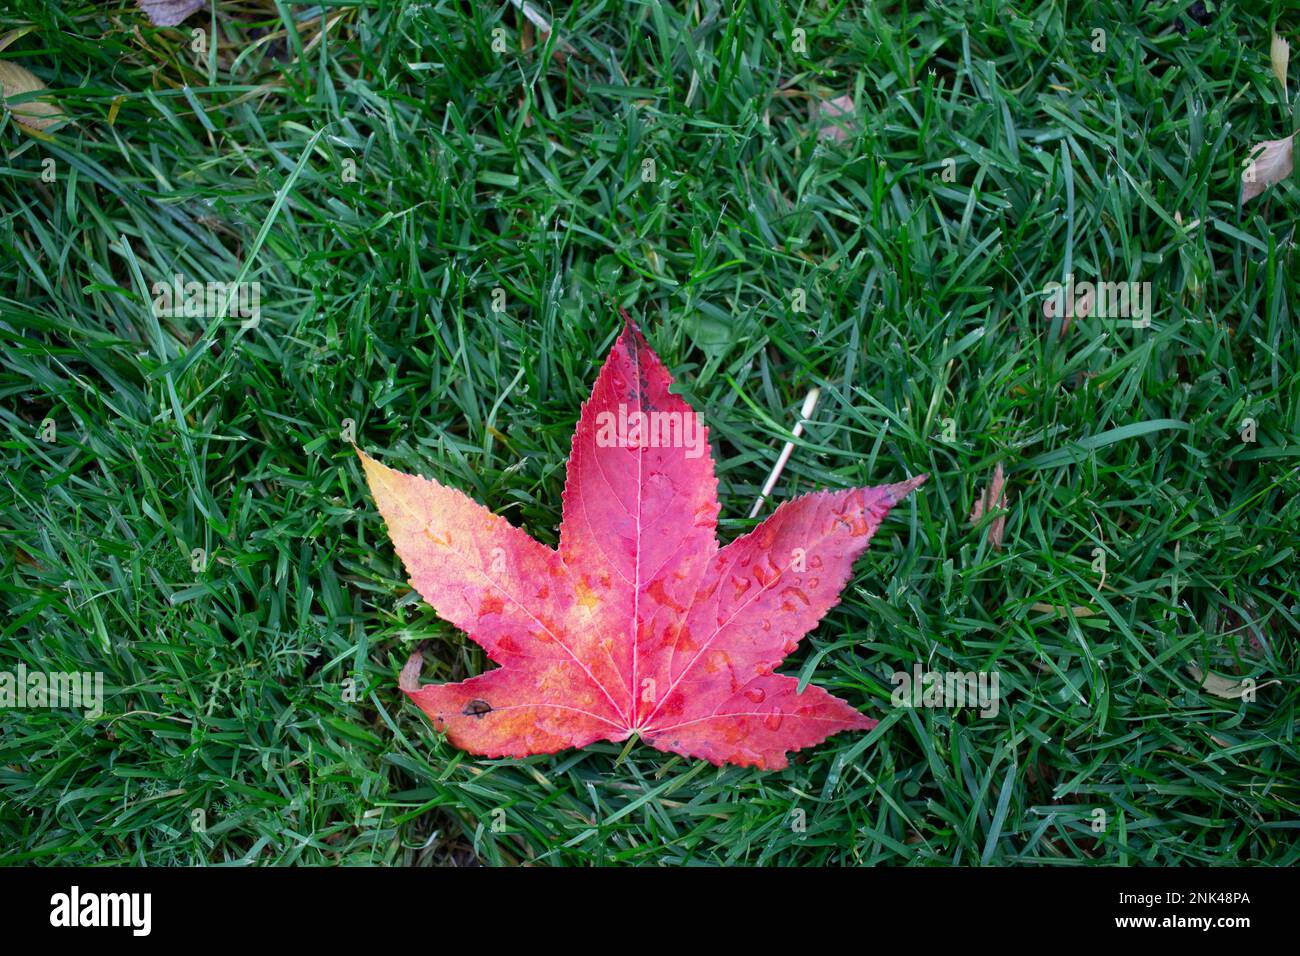 Looking straight down at a vibrant five pointed purple leaf on deep green grass Stock Photo